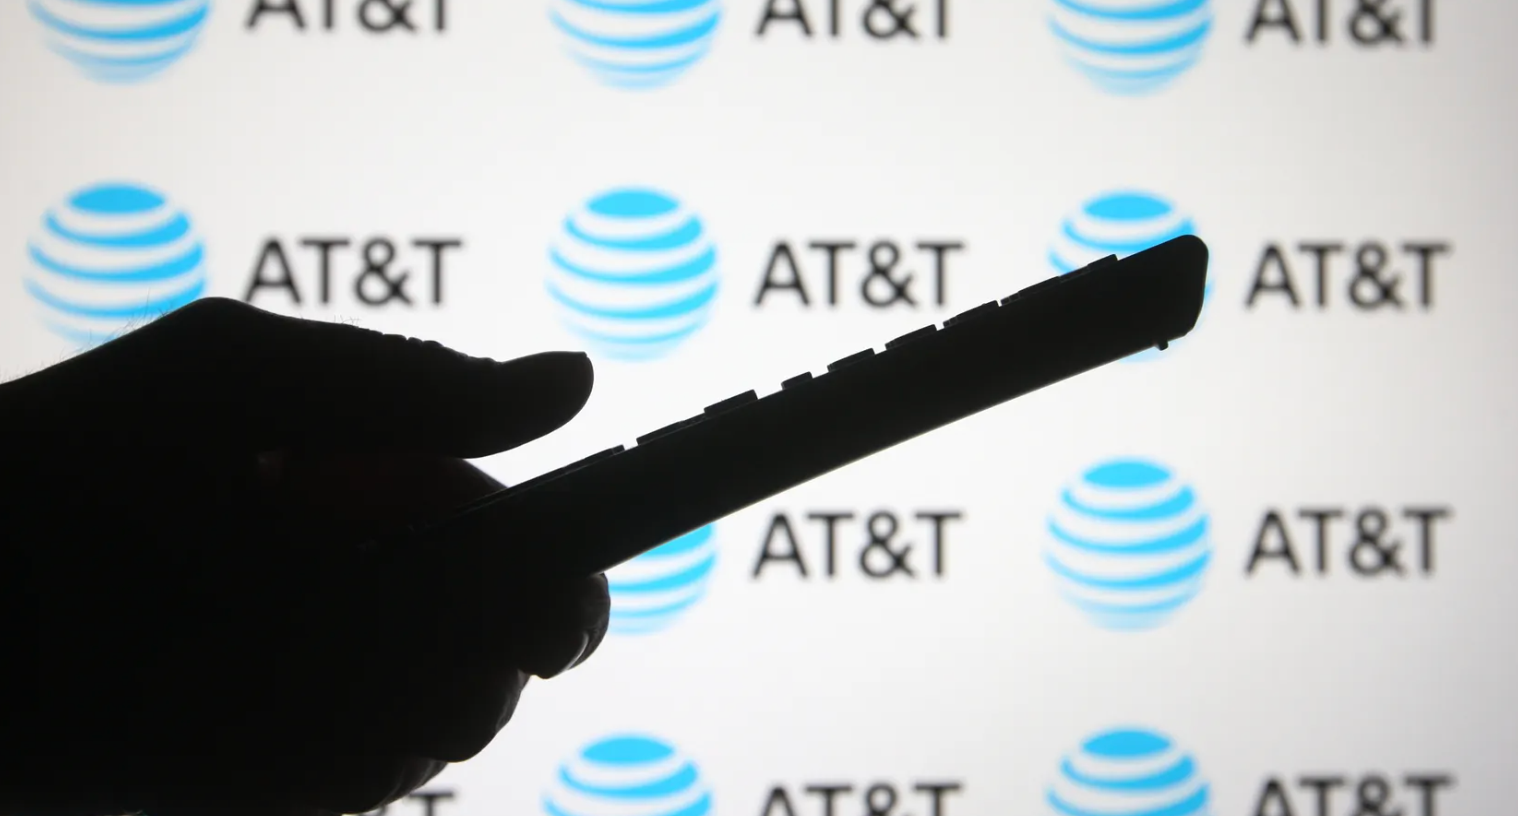 Why AT&T Is Agreeing To Pay $6M Penalty To The SEC: What Investors Need To Know